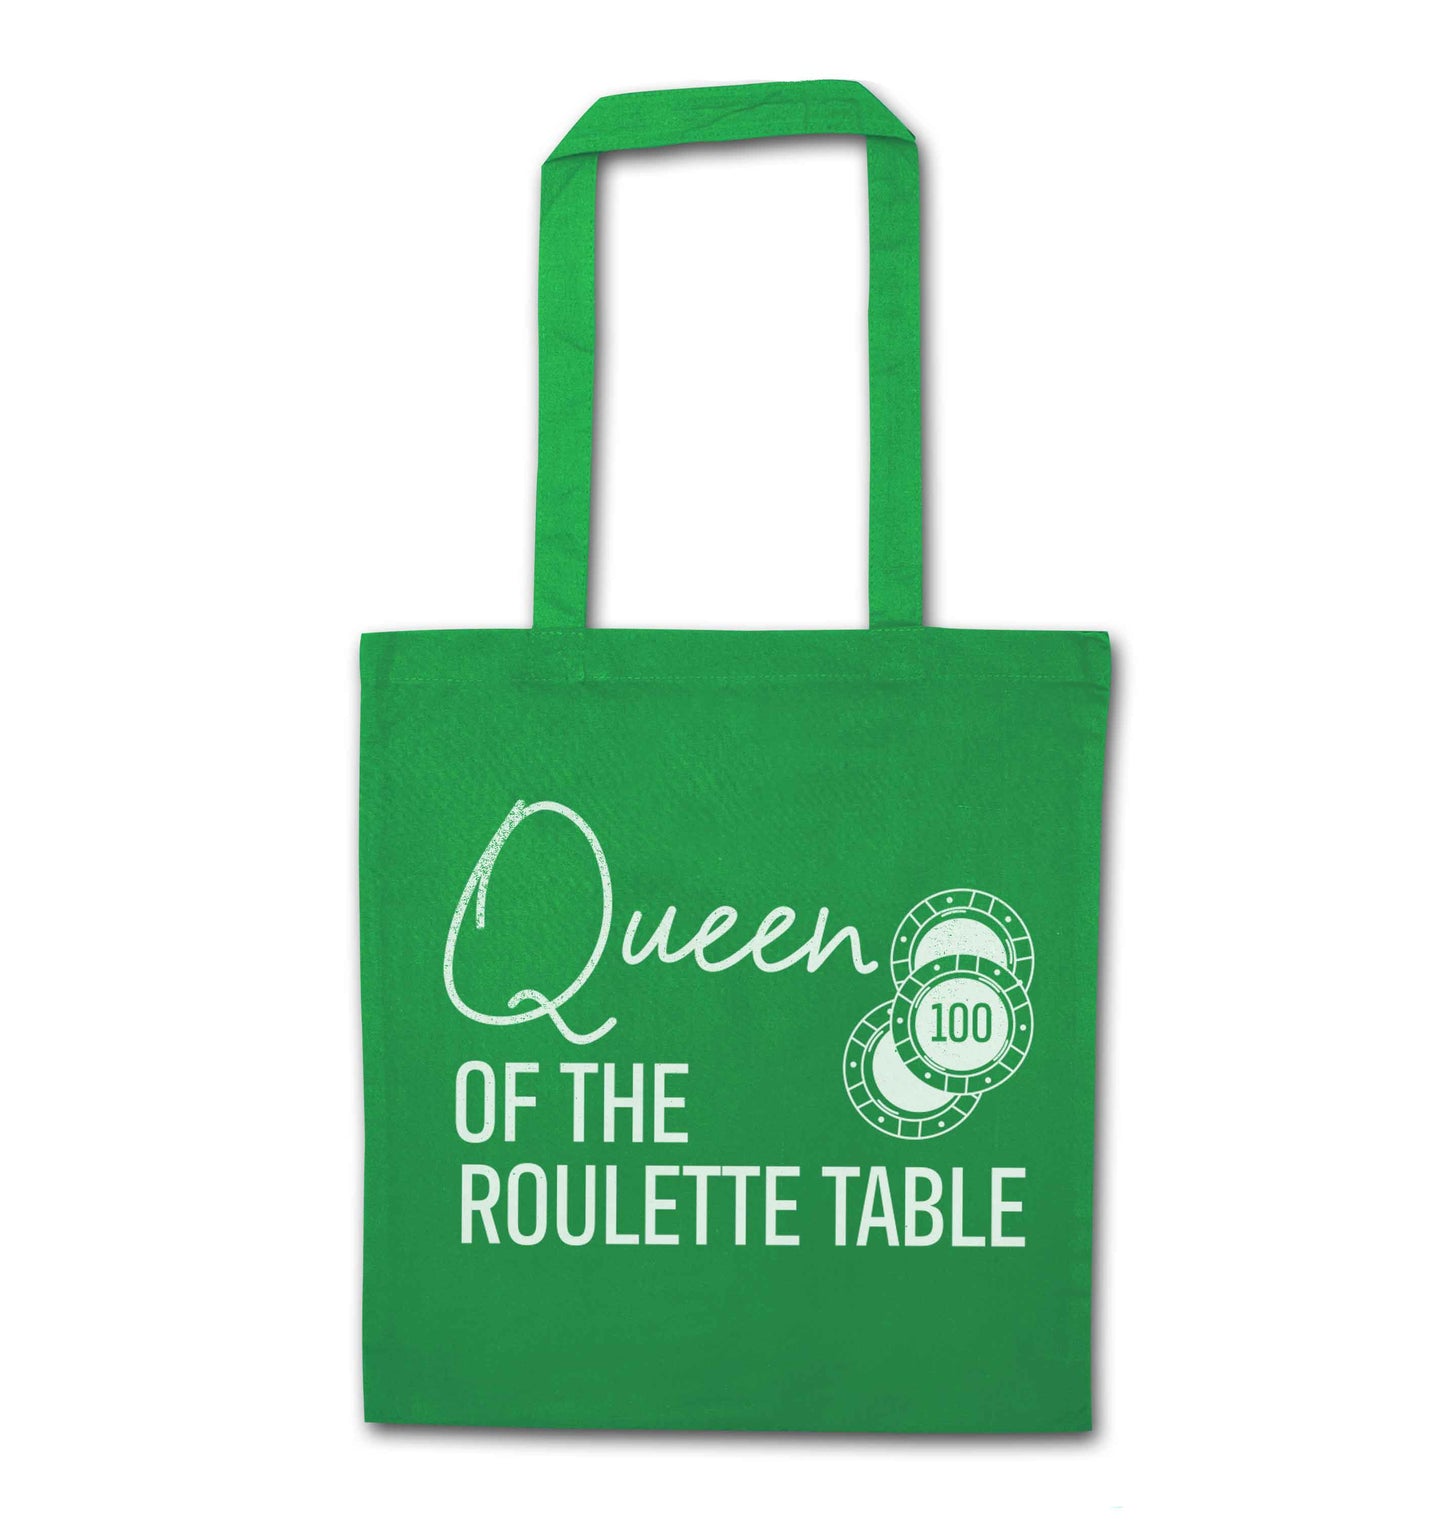 Queen of the roulette table green tote bag